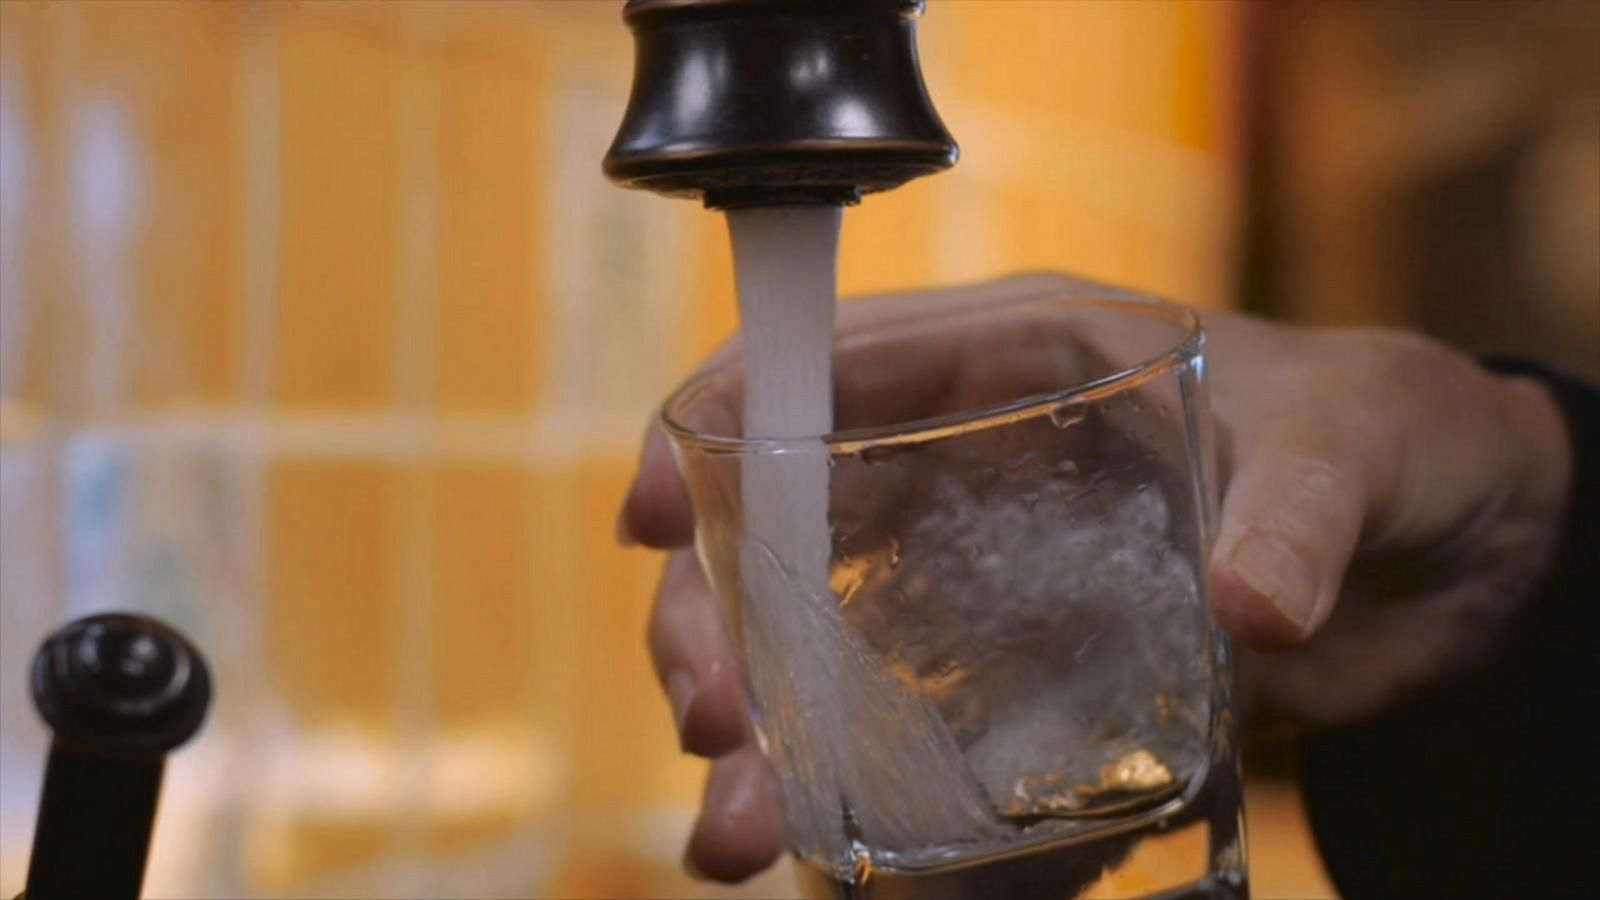 VIDEO: Tips to improve safety and taste of your tap water